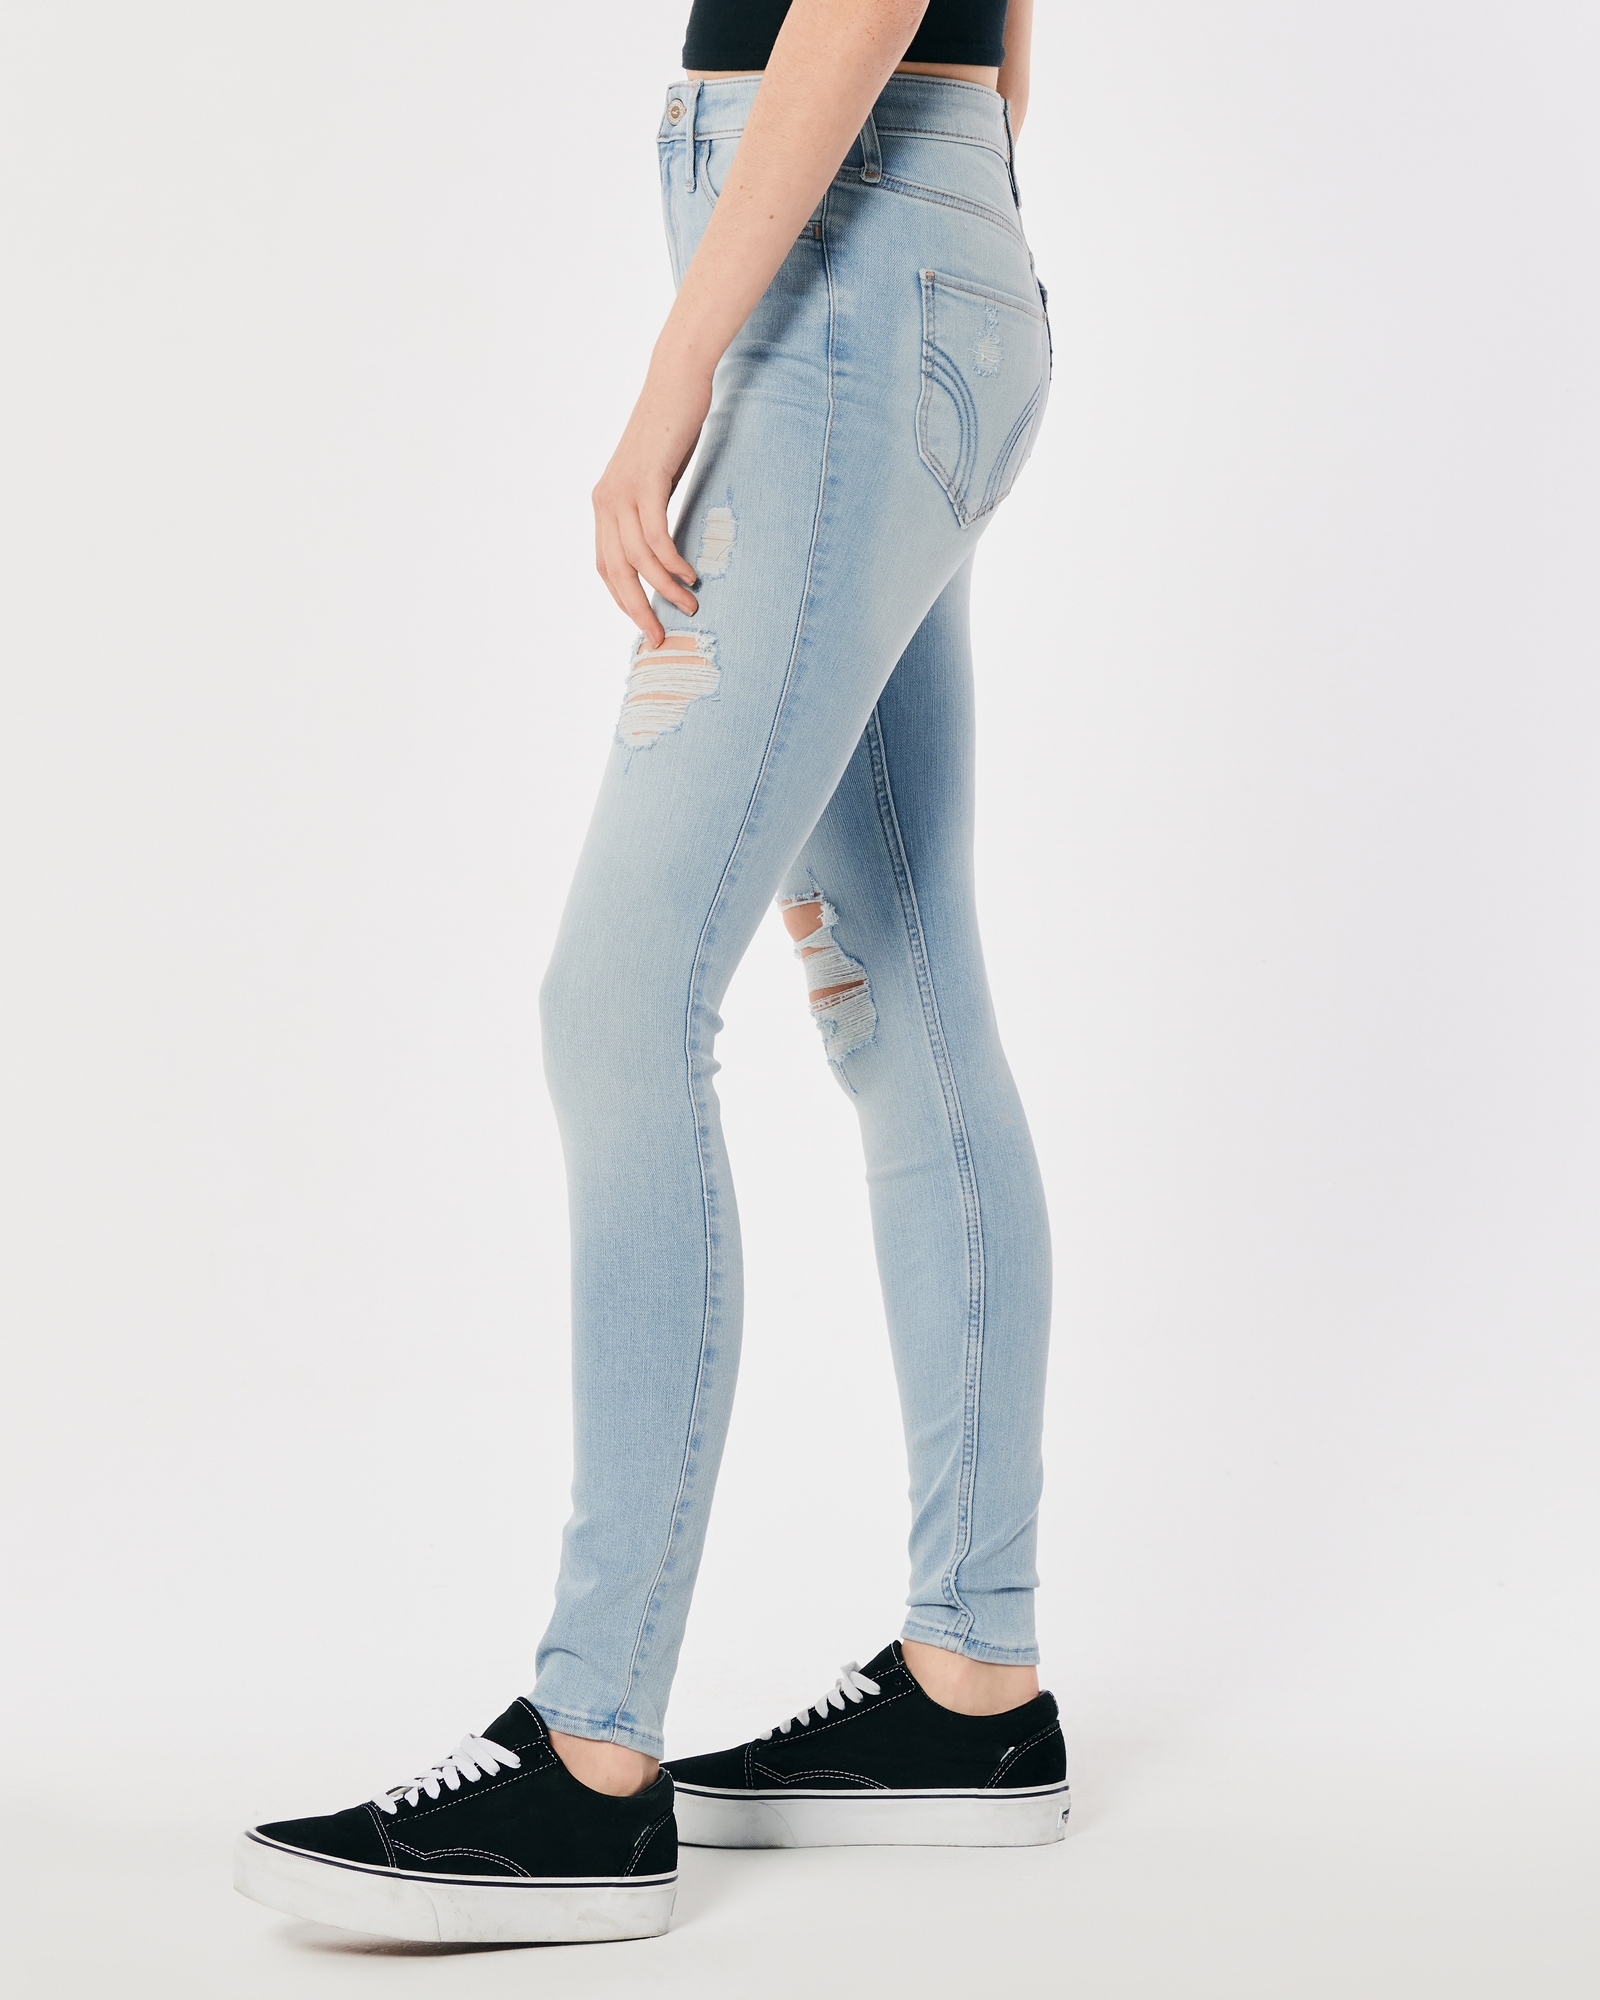 Women's Low-Rise Ripped Light Wash Super Skinny Jeans